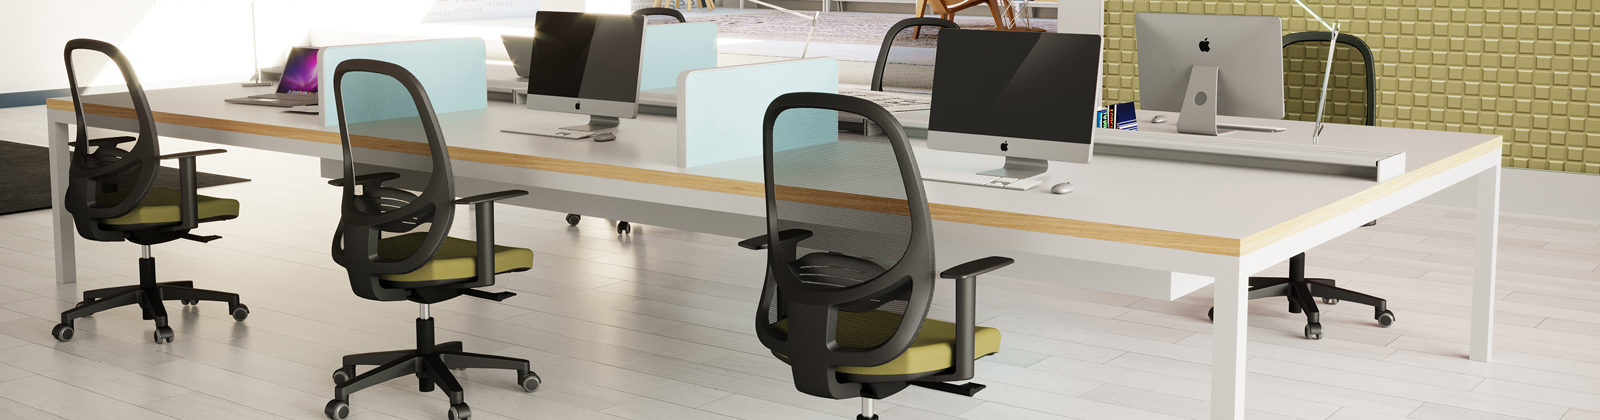 Verona task chairs at bench desk in office